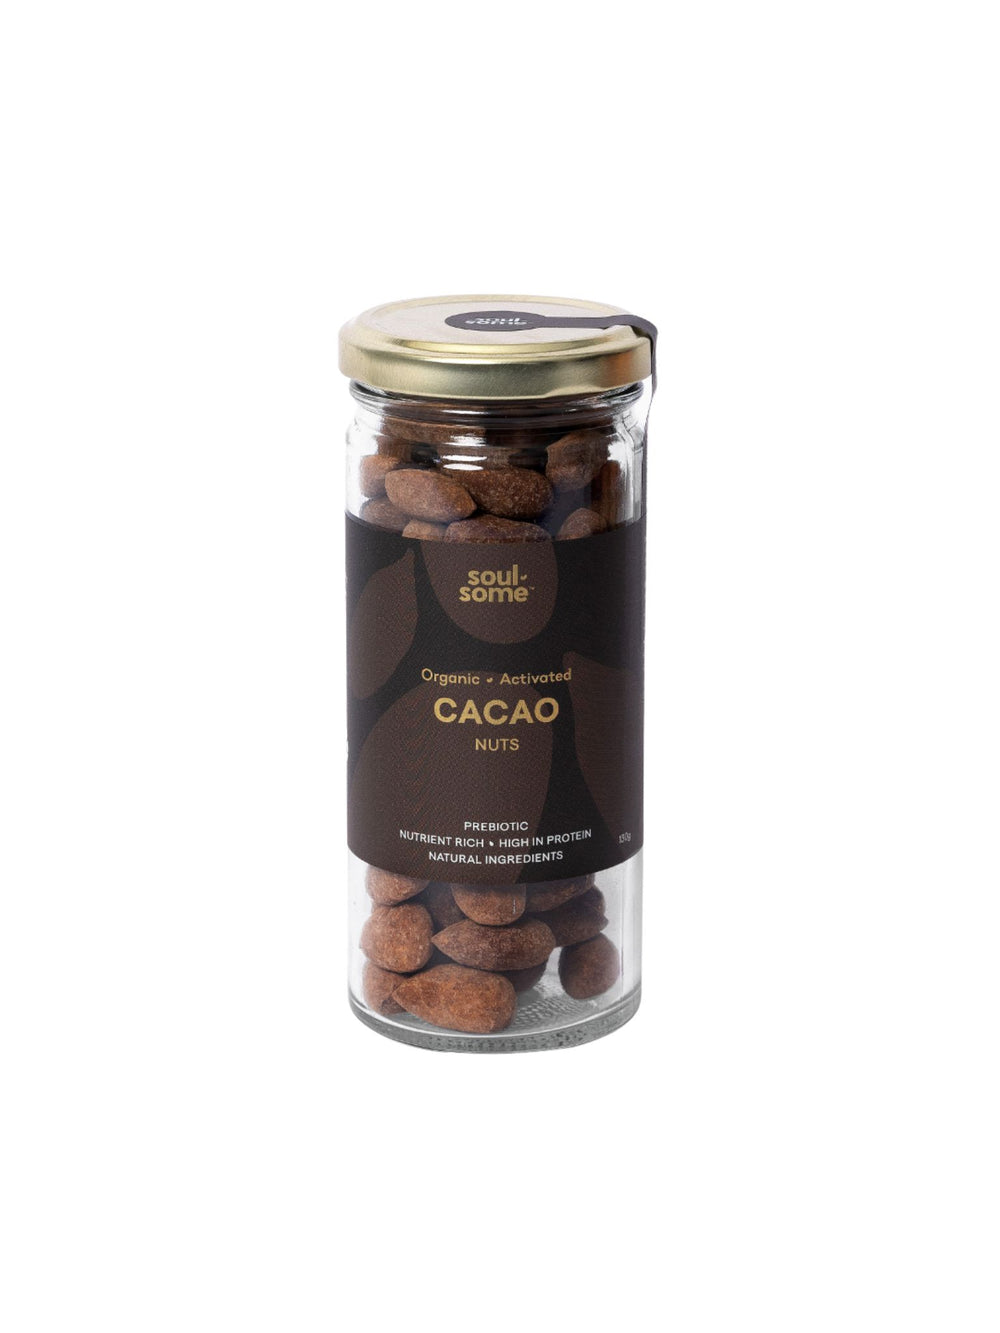 Cacao Activated Almonds Soulsome Nuts 130g